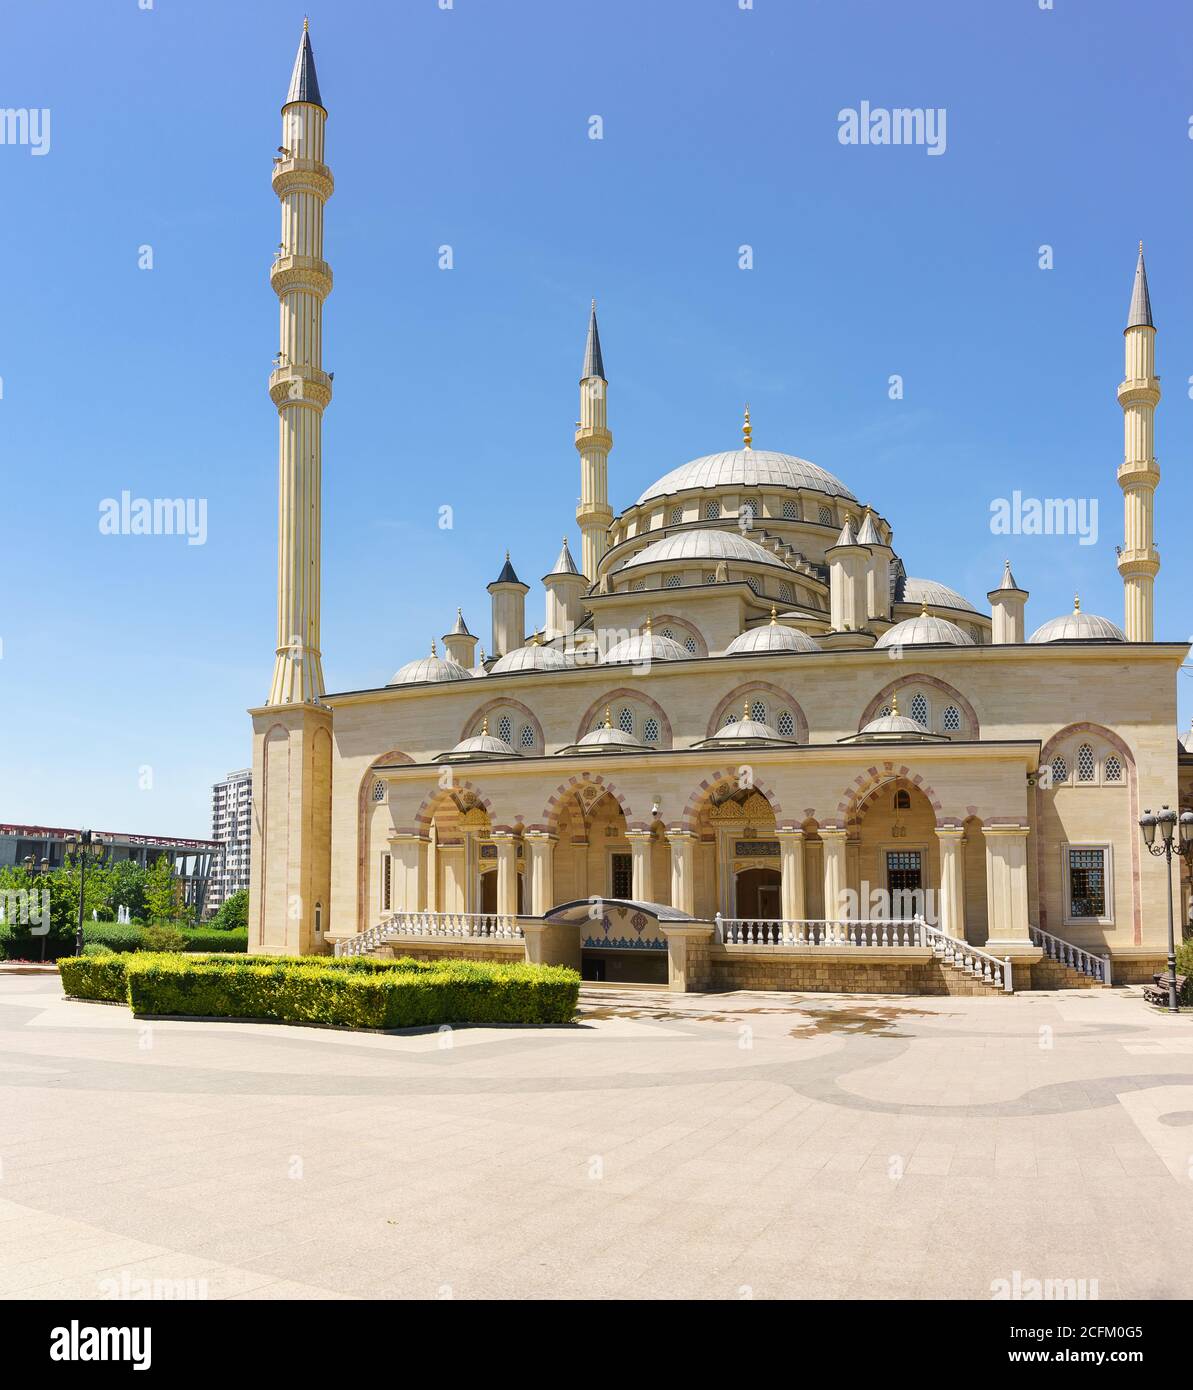 Grozny, Chechen Republic, Russia - June 02, 2019: the Facade of the Mosque the Heart of Chechnya named after Akhmat Kadyrov on a Sunny summer day. One Stock Photo